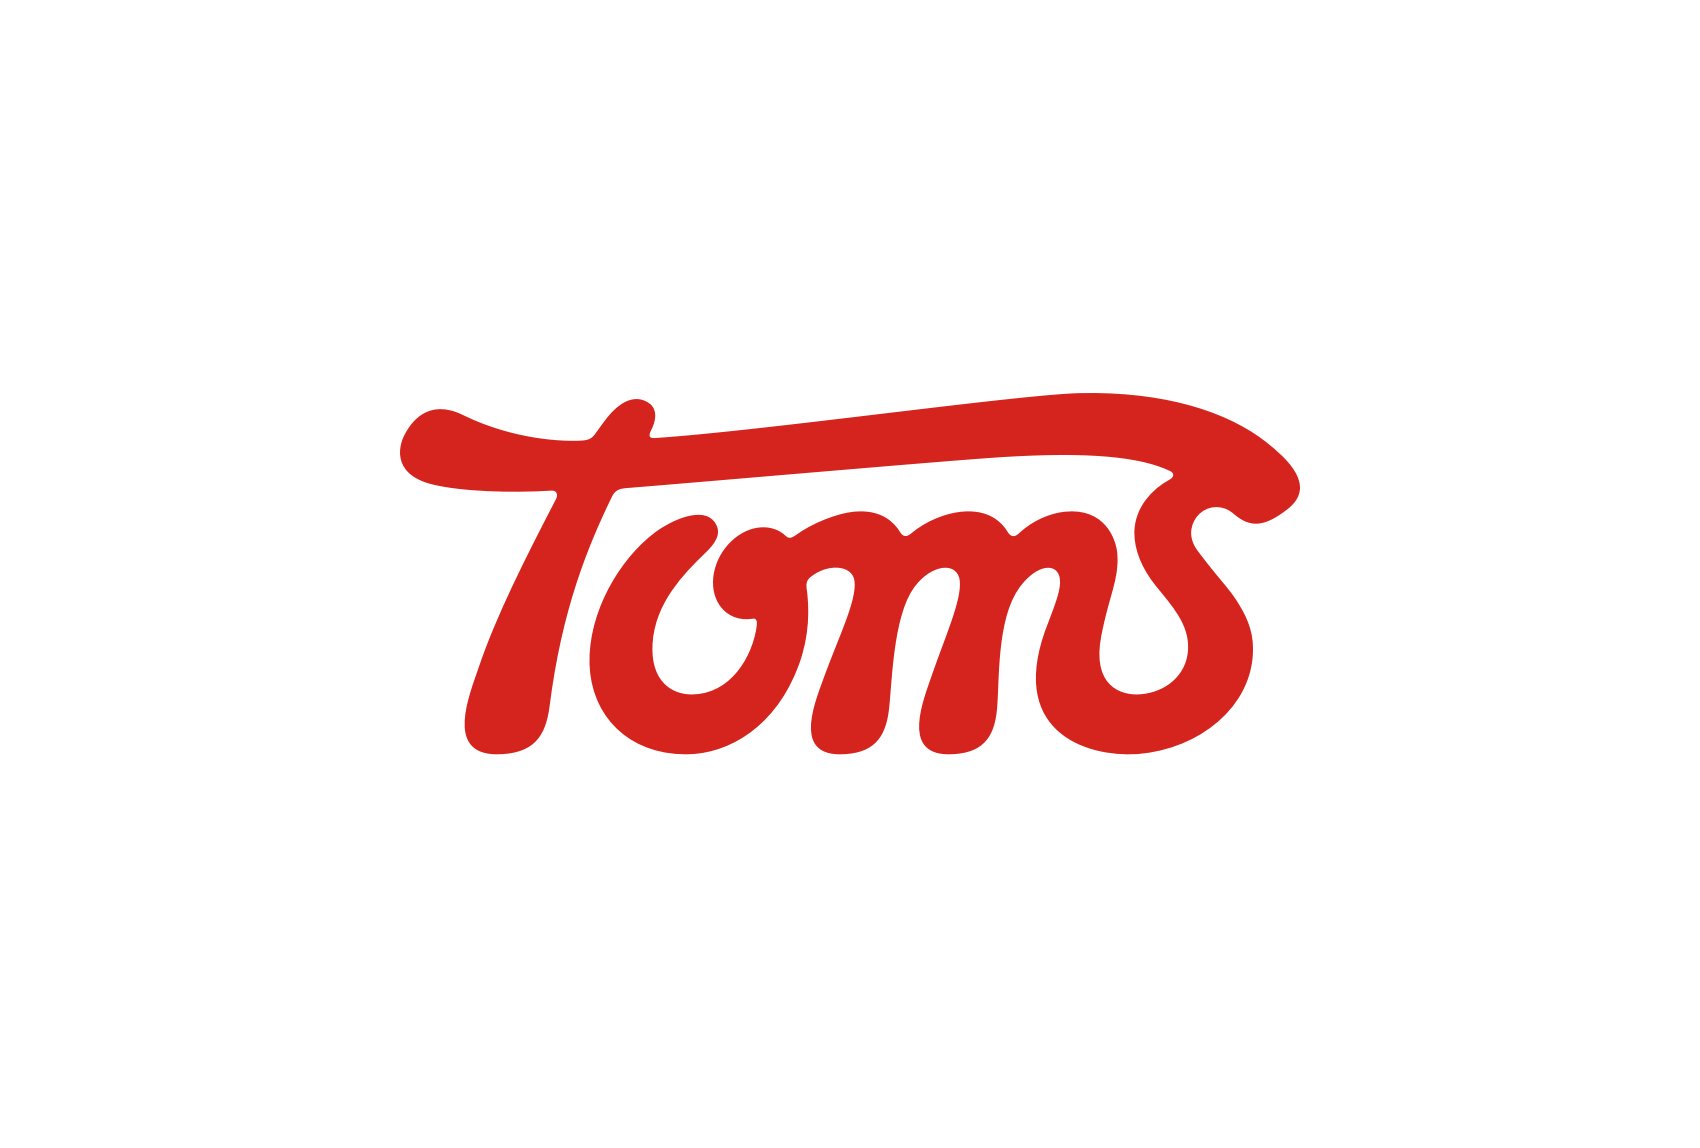 handcrafted-logo-toms